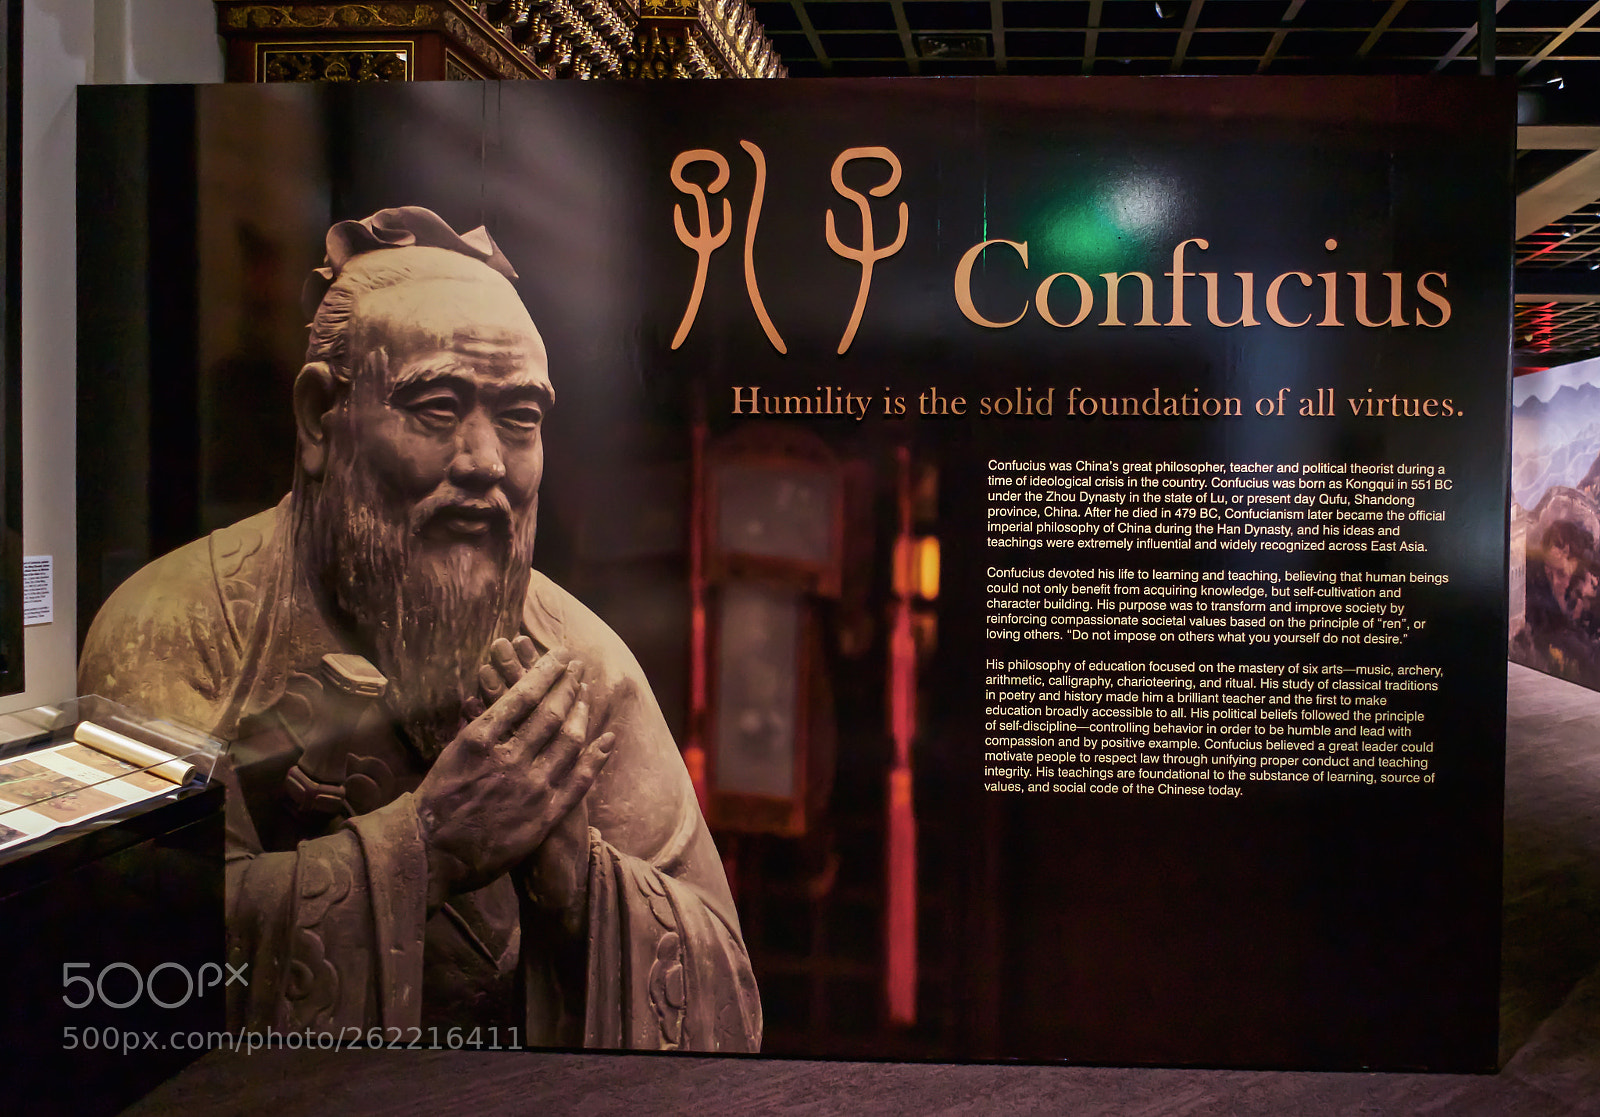 Sony a7 sample photo. Confucius the great philosopher photography